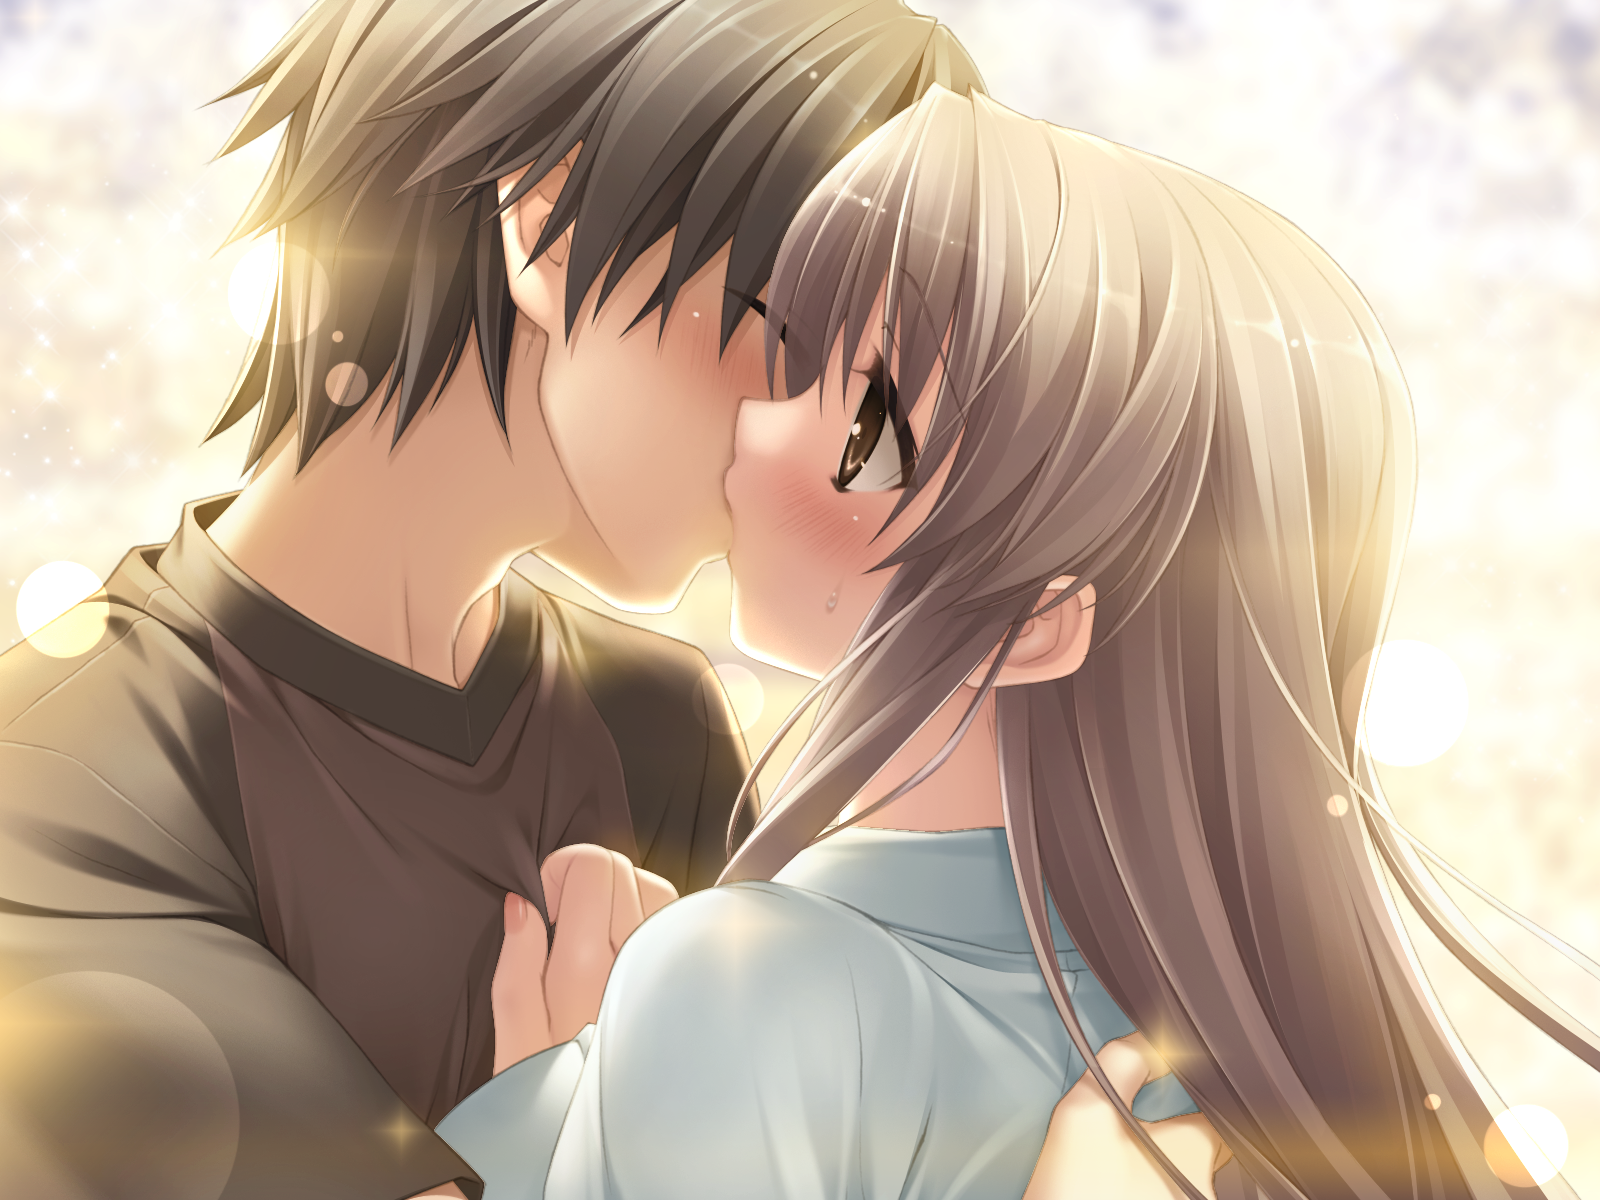 1600X1200 Cute Anime Couple Kissing Wallpapers - Wallpaper Cave. 